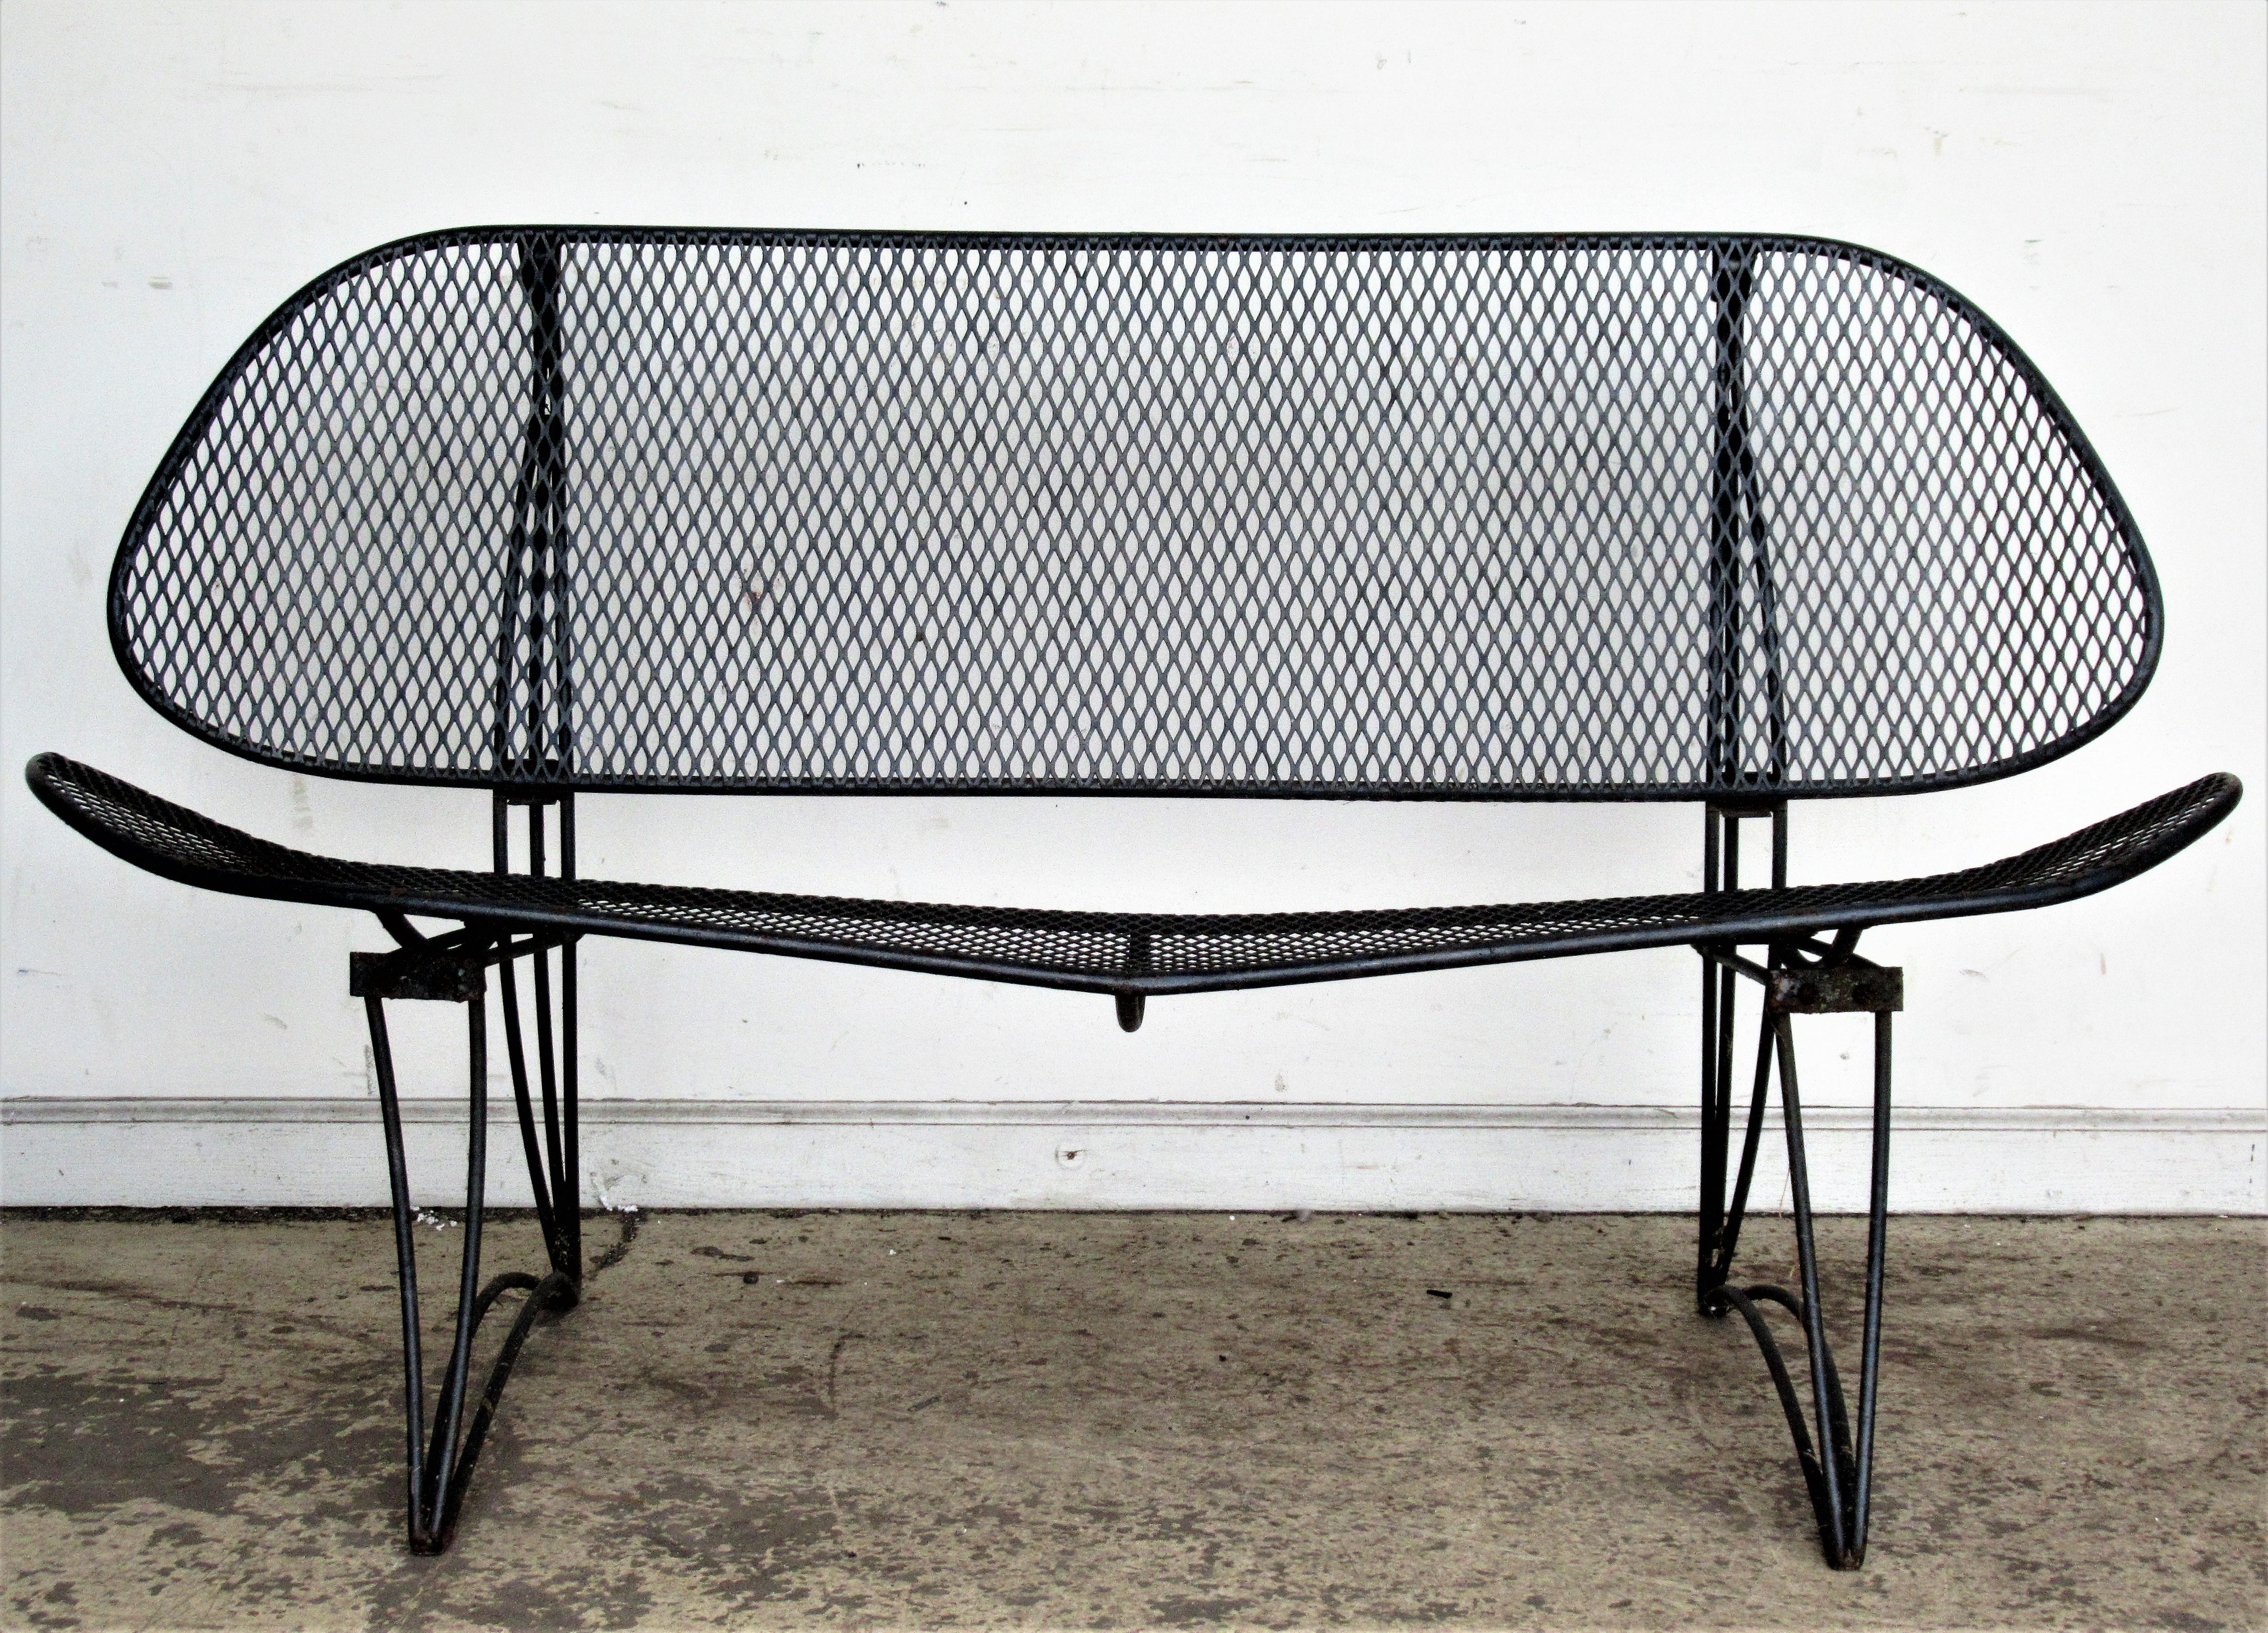 A set of modernist wrought iron diamond mesh clamshell design patio garden furniture consisting of a settee and two lounge chairs ( one is a bouncer )  in original black enamel painted factory finish with minor wear. Often attributed to Maurizio